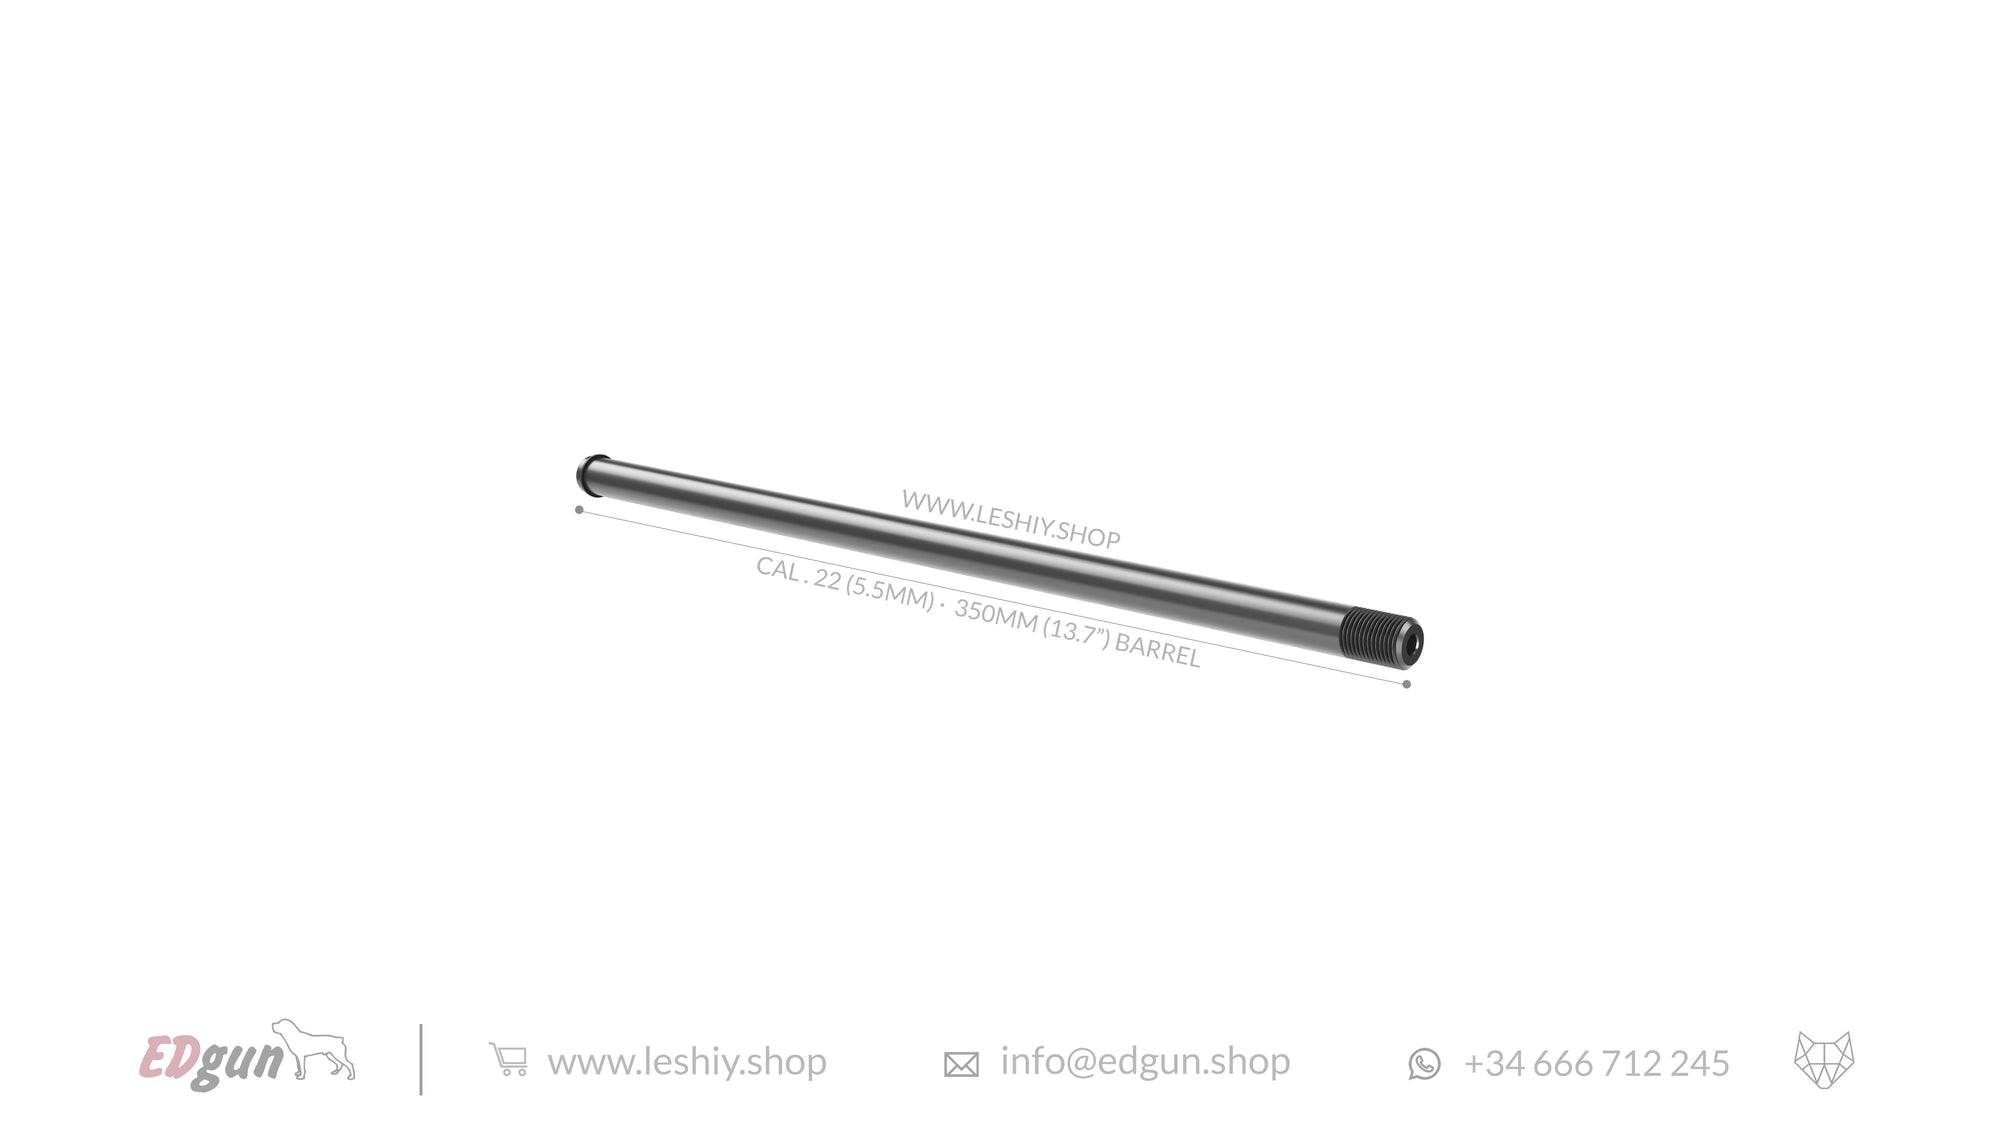 Barrels Lothar Walther cal. 22 (5.5mm) - 350mm (13.7¨) for Leshiy 2